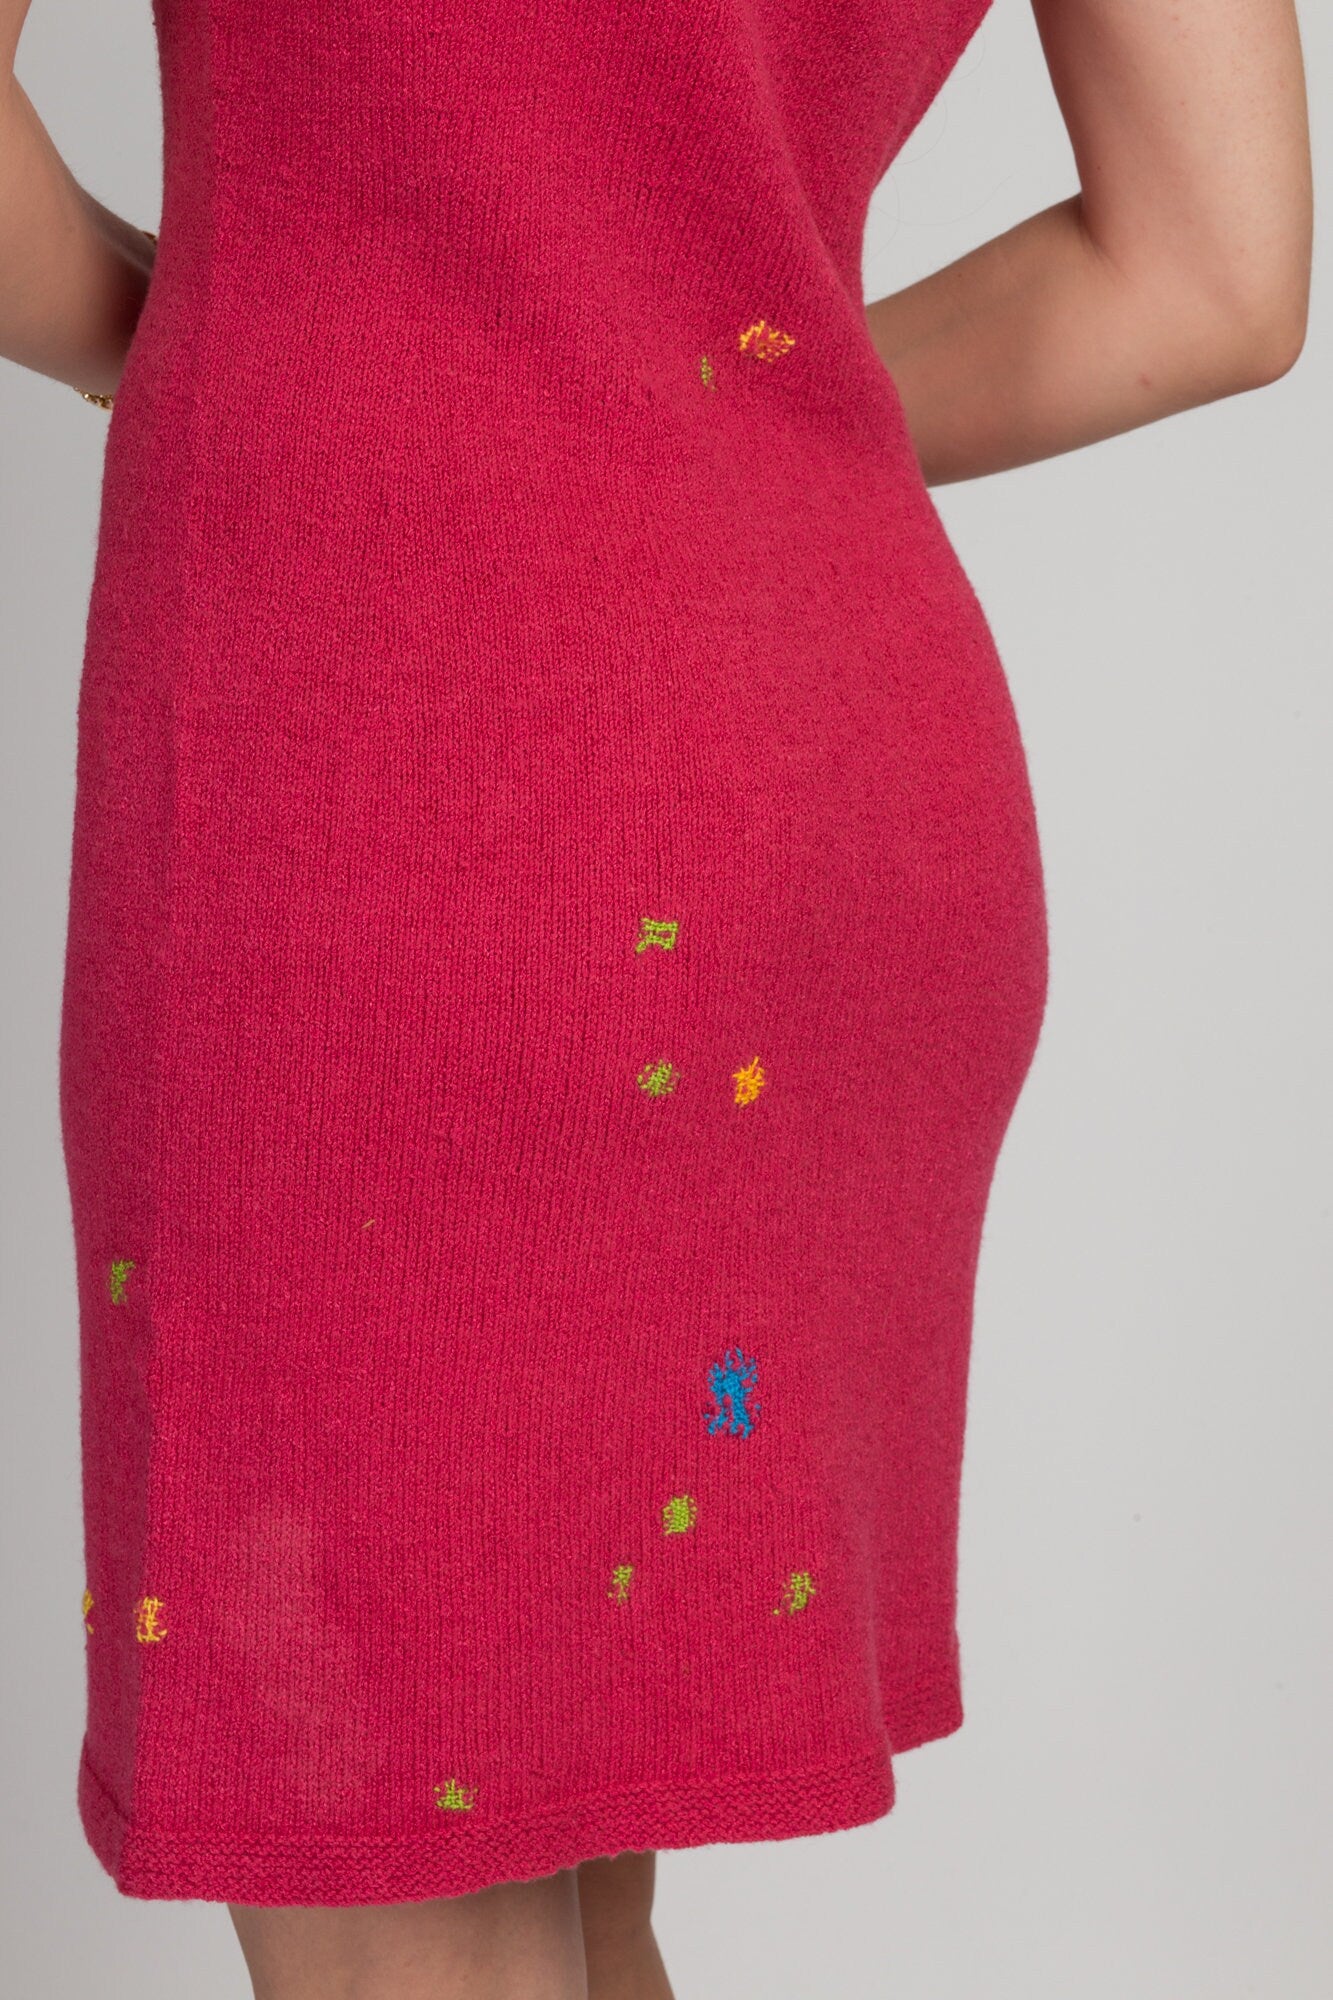 50s 60s Colorful Darned Knit Mini Dress - Medium to Large 